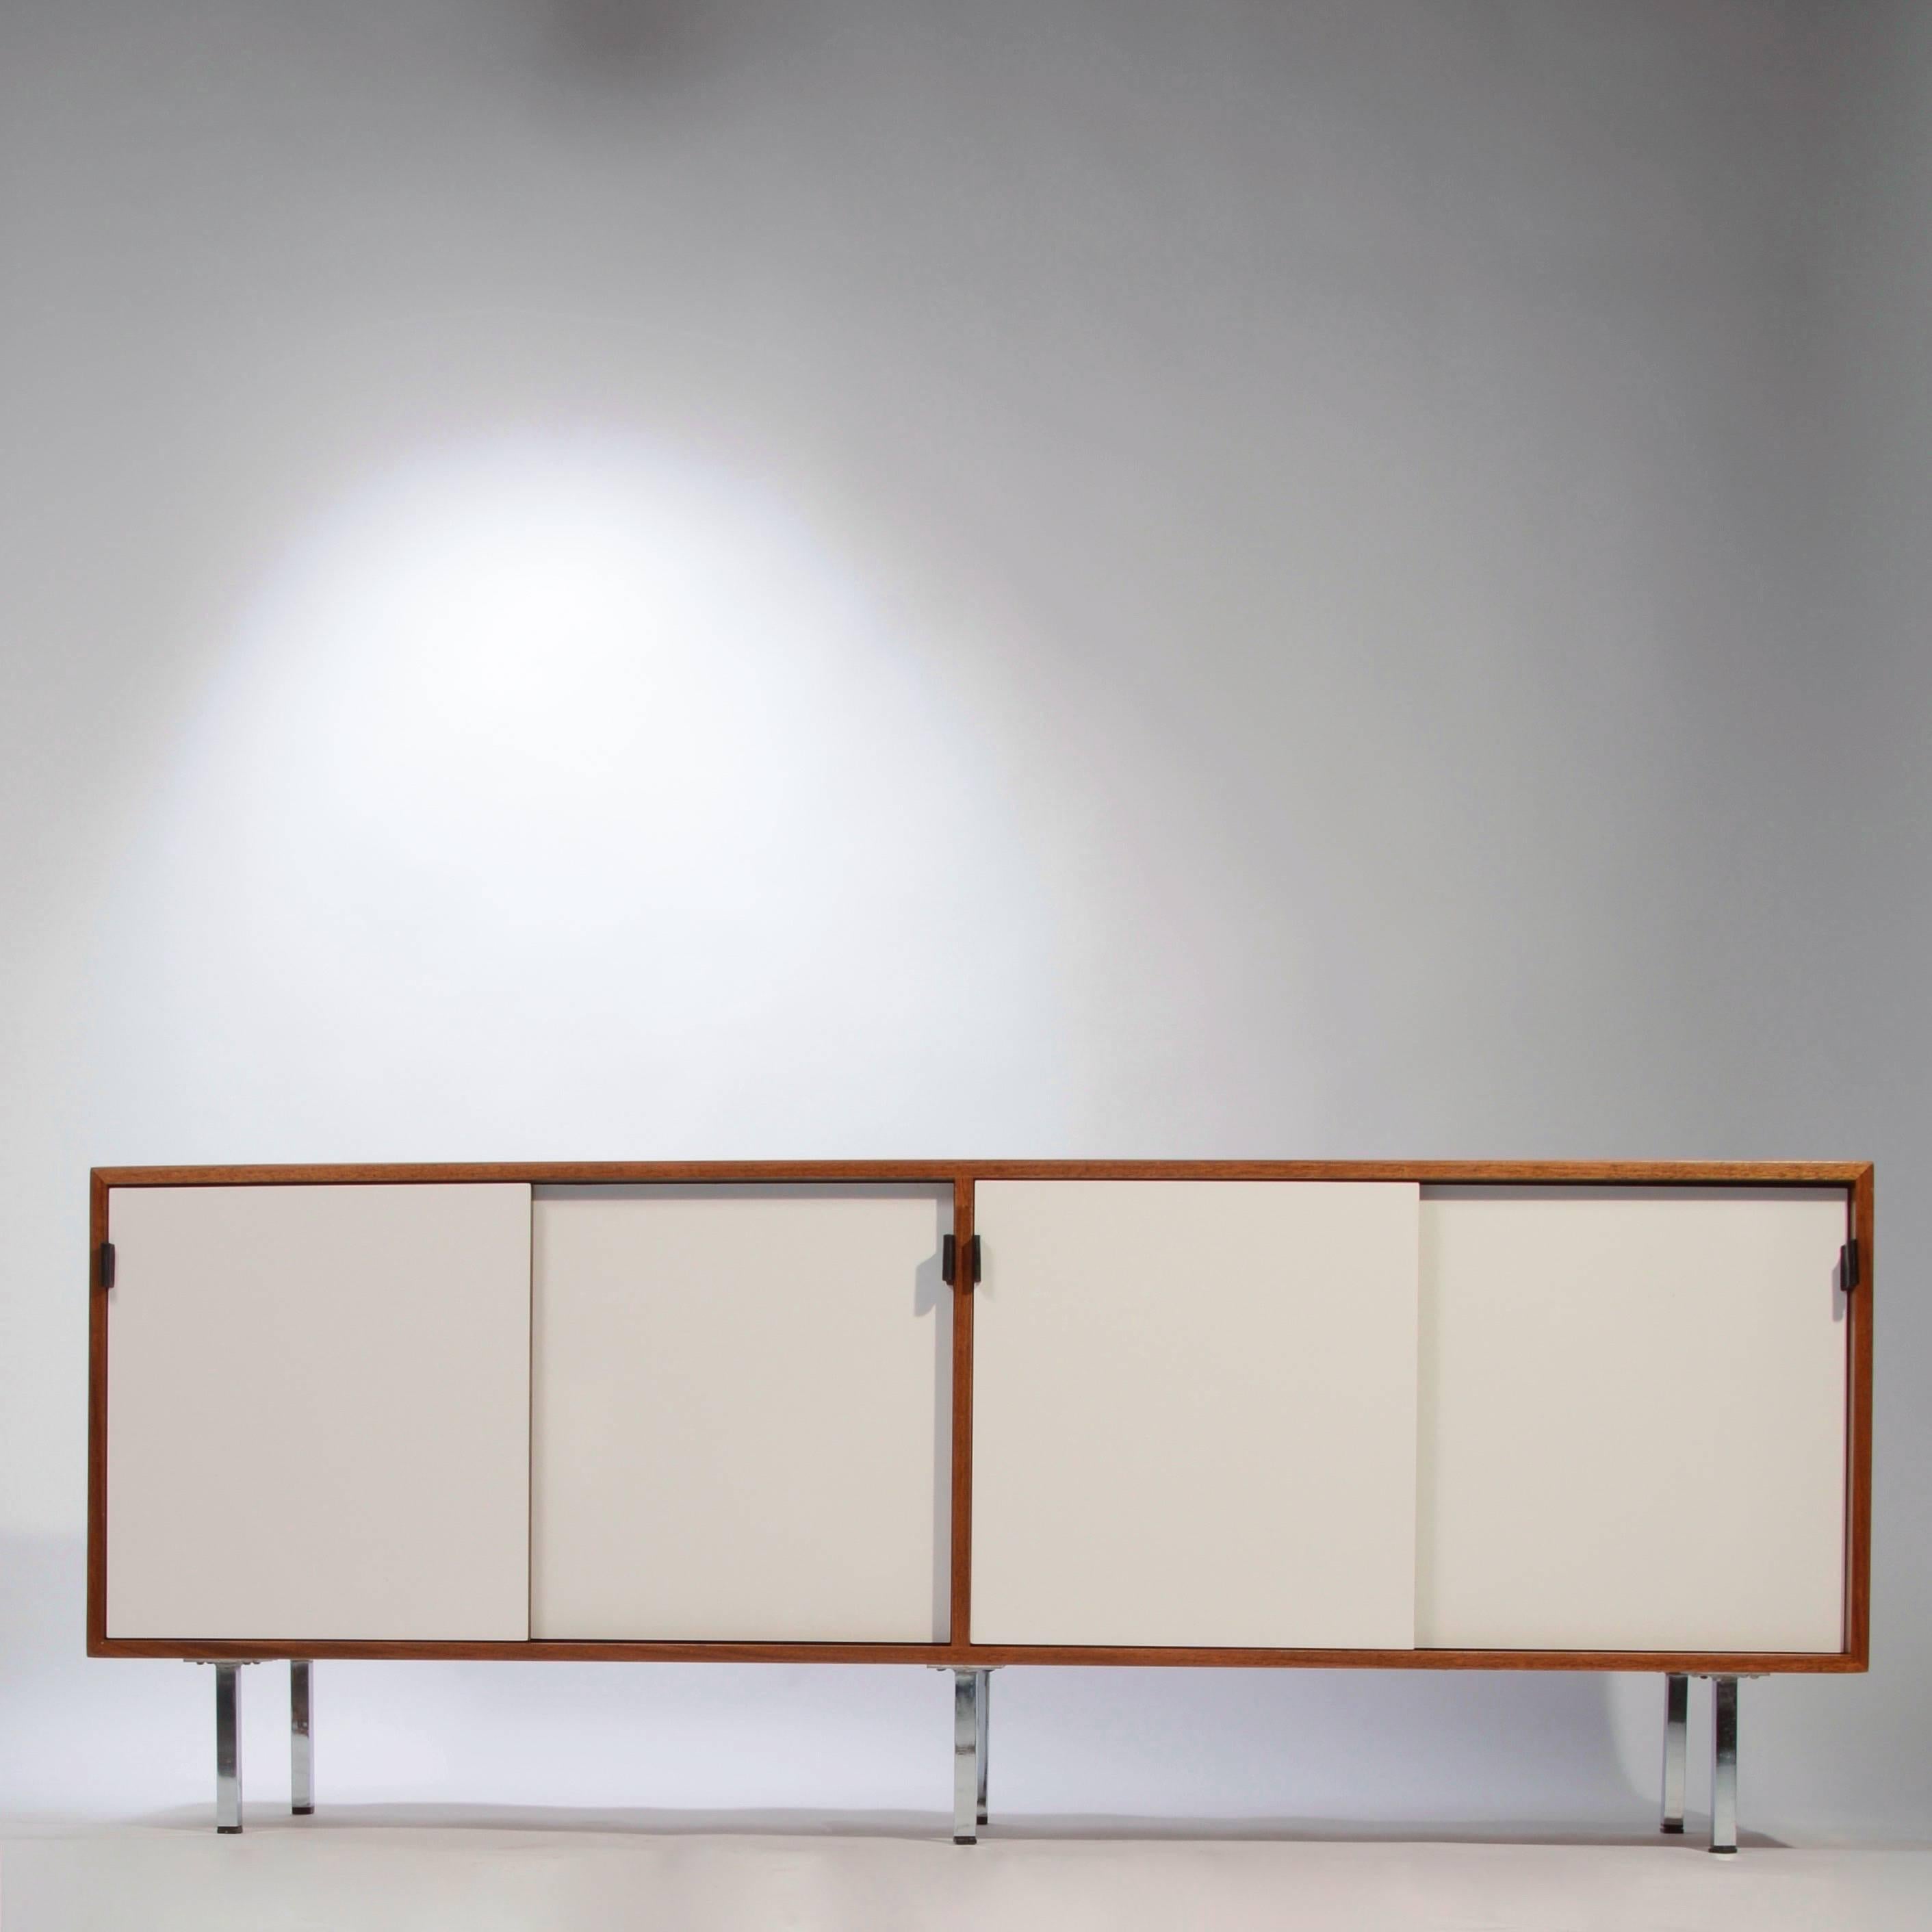 This is a fully restored early Florence Knoll credenza featuring new white Formica sliding doors, new professional lacquer finish, leather pulls, chrome legs and solid oak drawers. We have ten in stock and can offer a range of interior options such